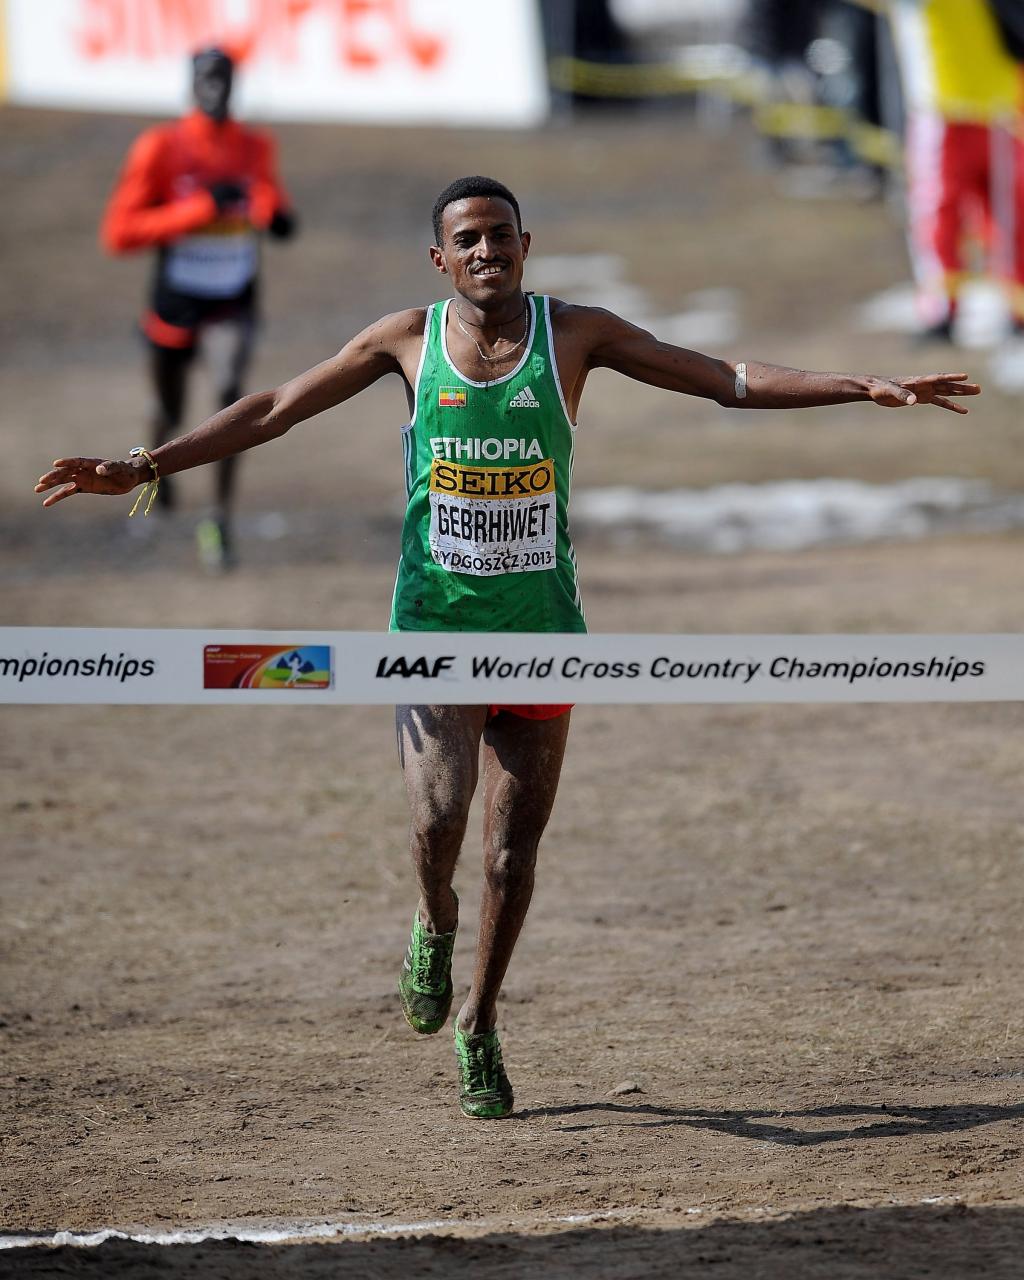 The 2017 World Cross Country Championships is among the flagship events that the IAAF is looking to attract bidders for